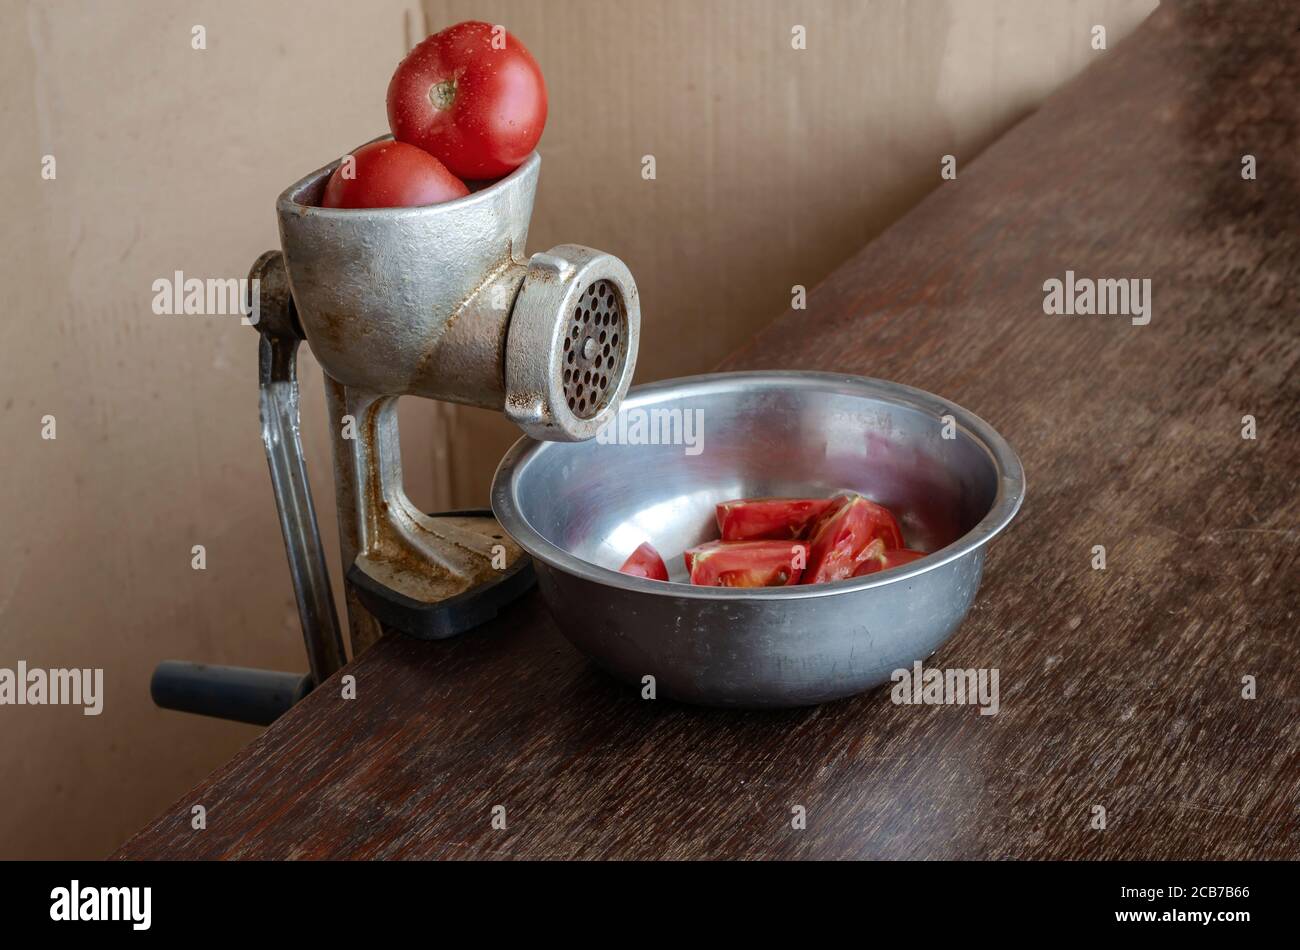 Manual vintage meat grinder and ripe tomatoes on the table. Making homemade  tomato sauce. Use of outdated kitchen utensils Stock Photo - Alamy